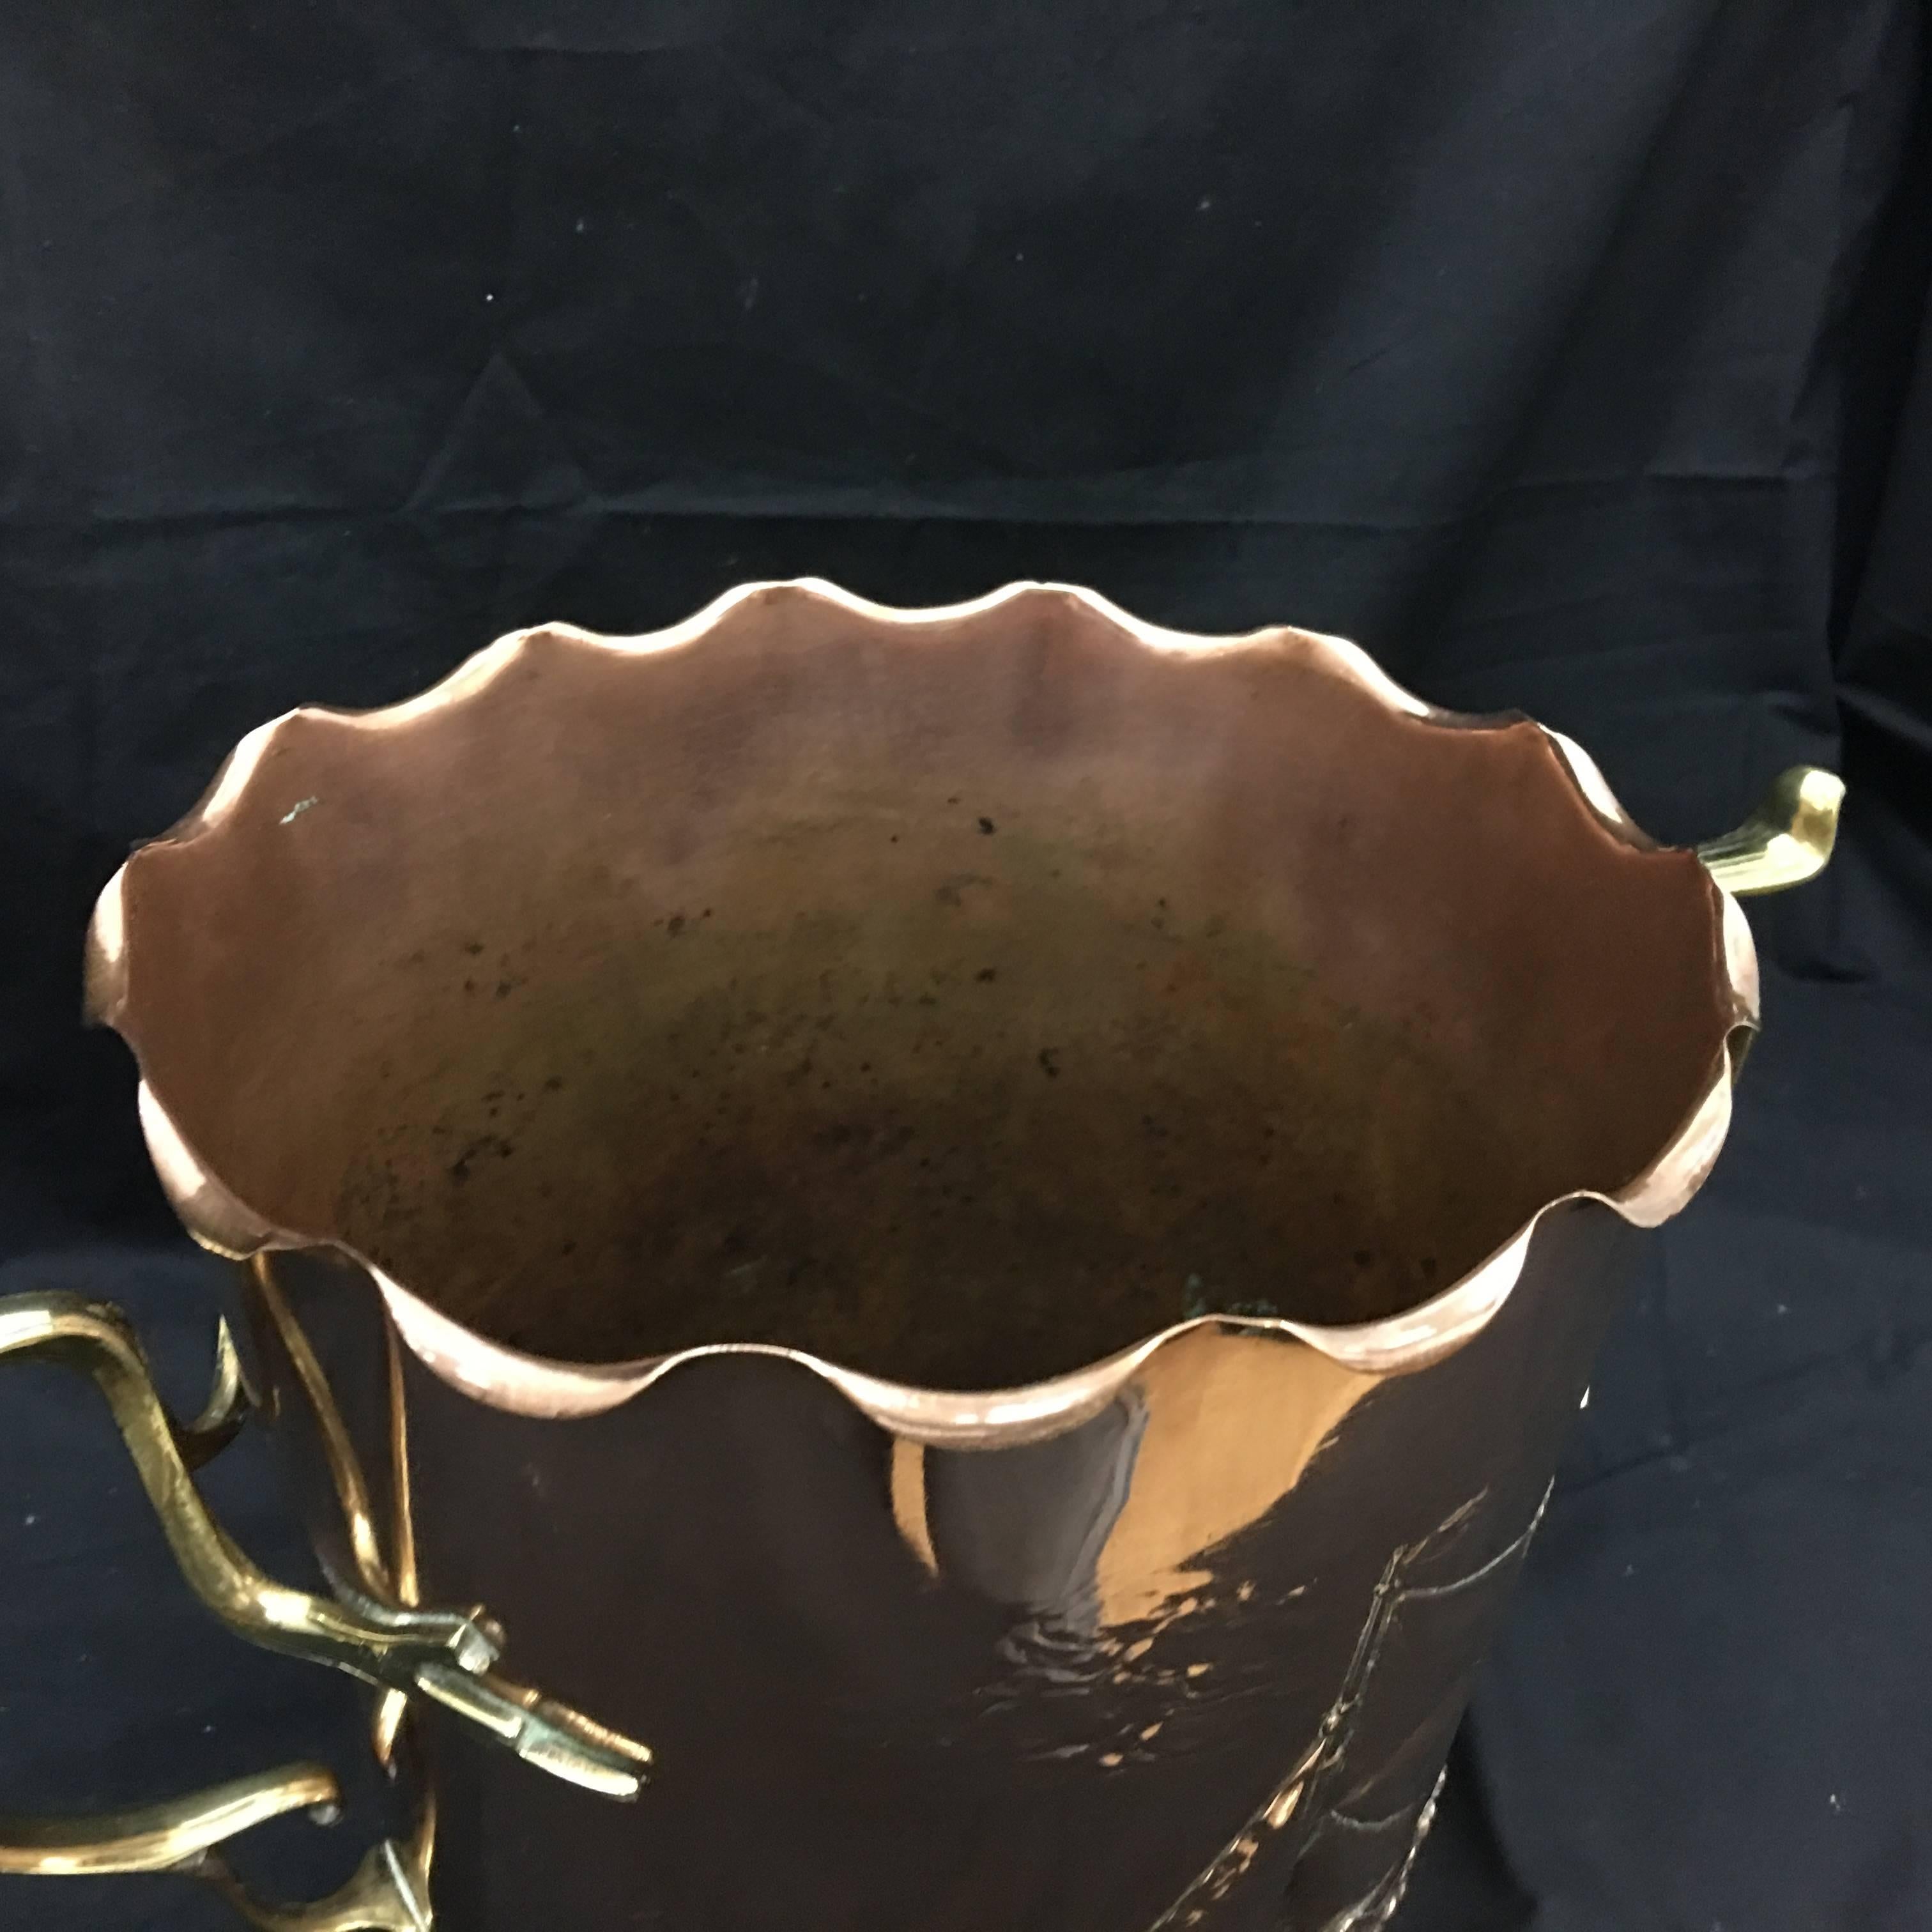 Rare engraved copper and brass wine cooler. It's made in Germany, circa 1900. The engraving represent a sail boat on the sea.